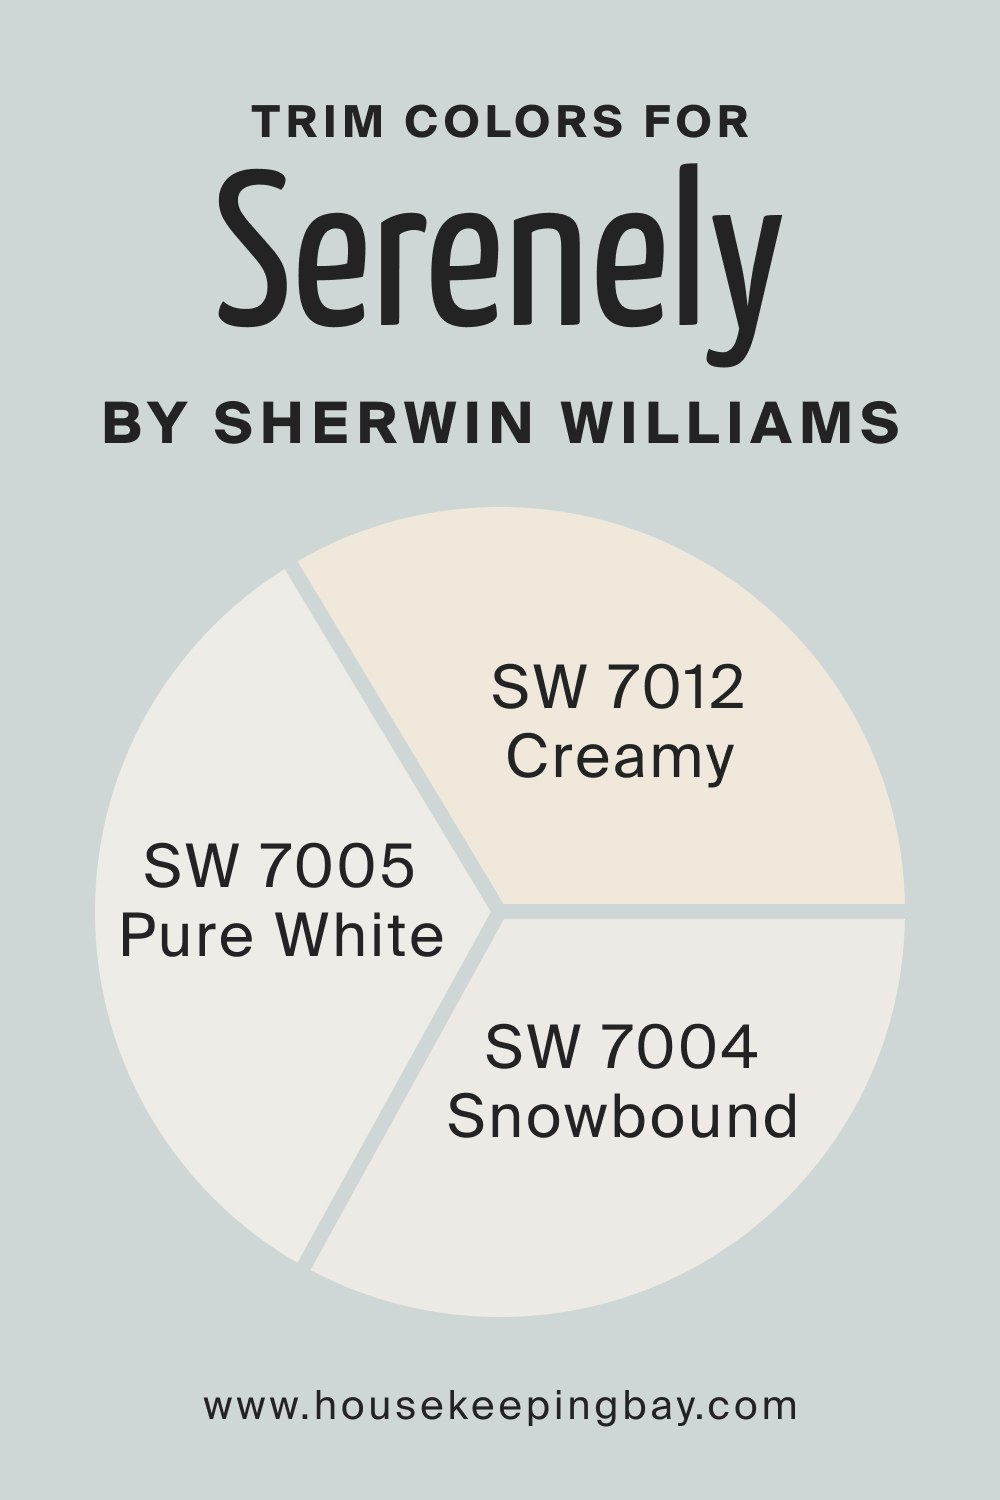 Trim Colors of SW 9632 Serenely by Sherwin Williams